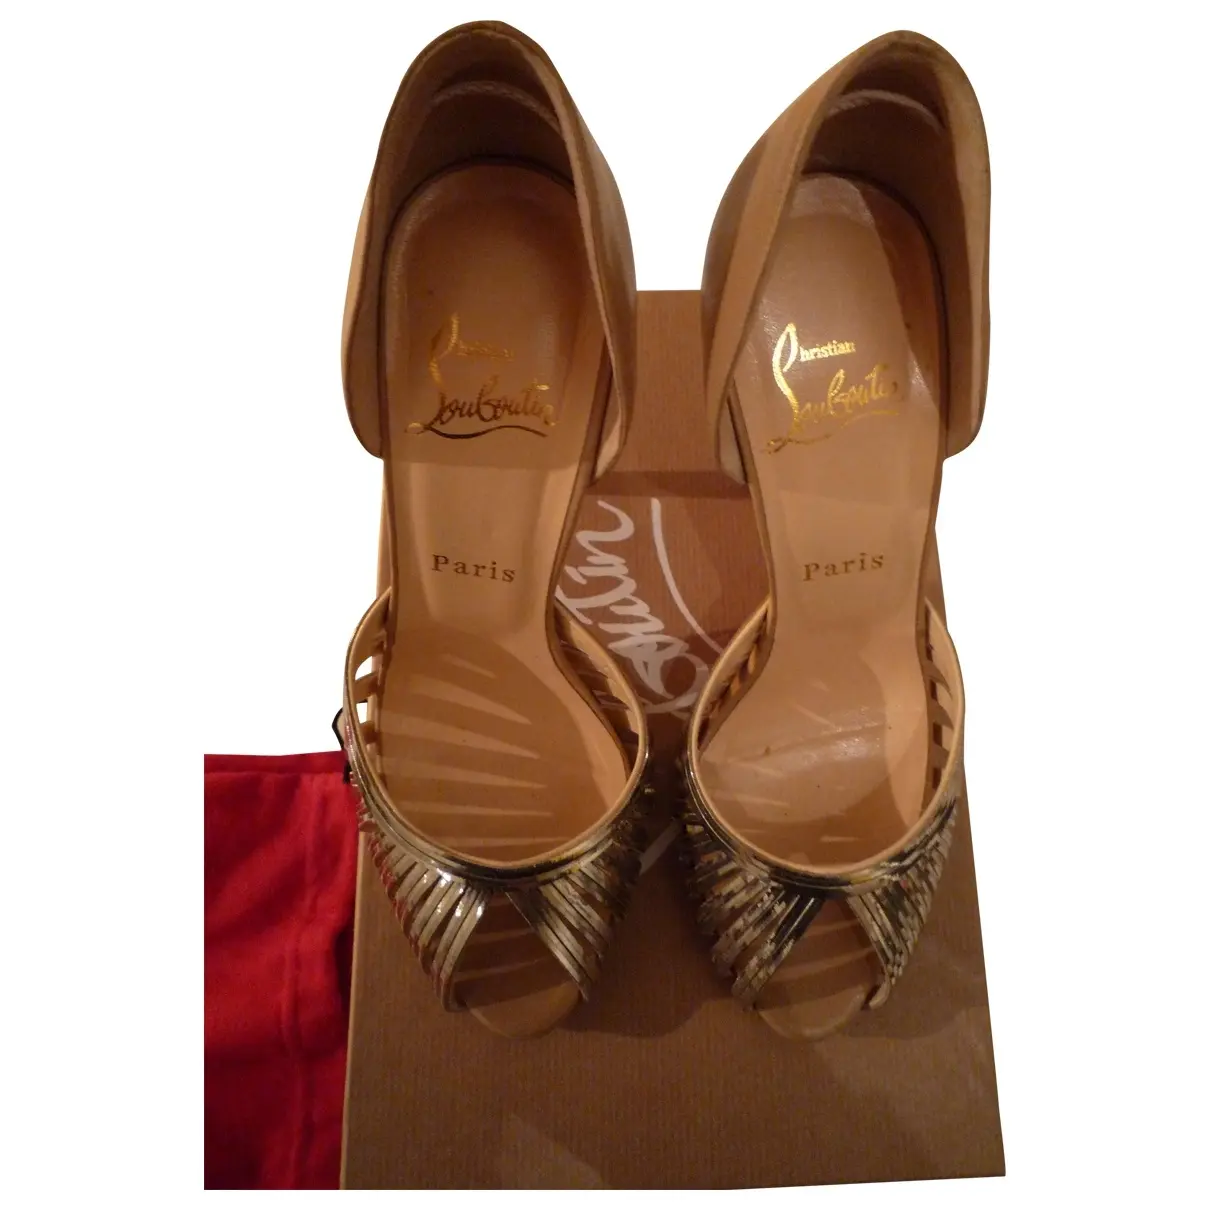 Christian Louboutin Leather heels for sale